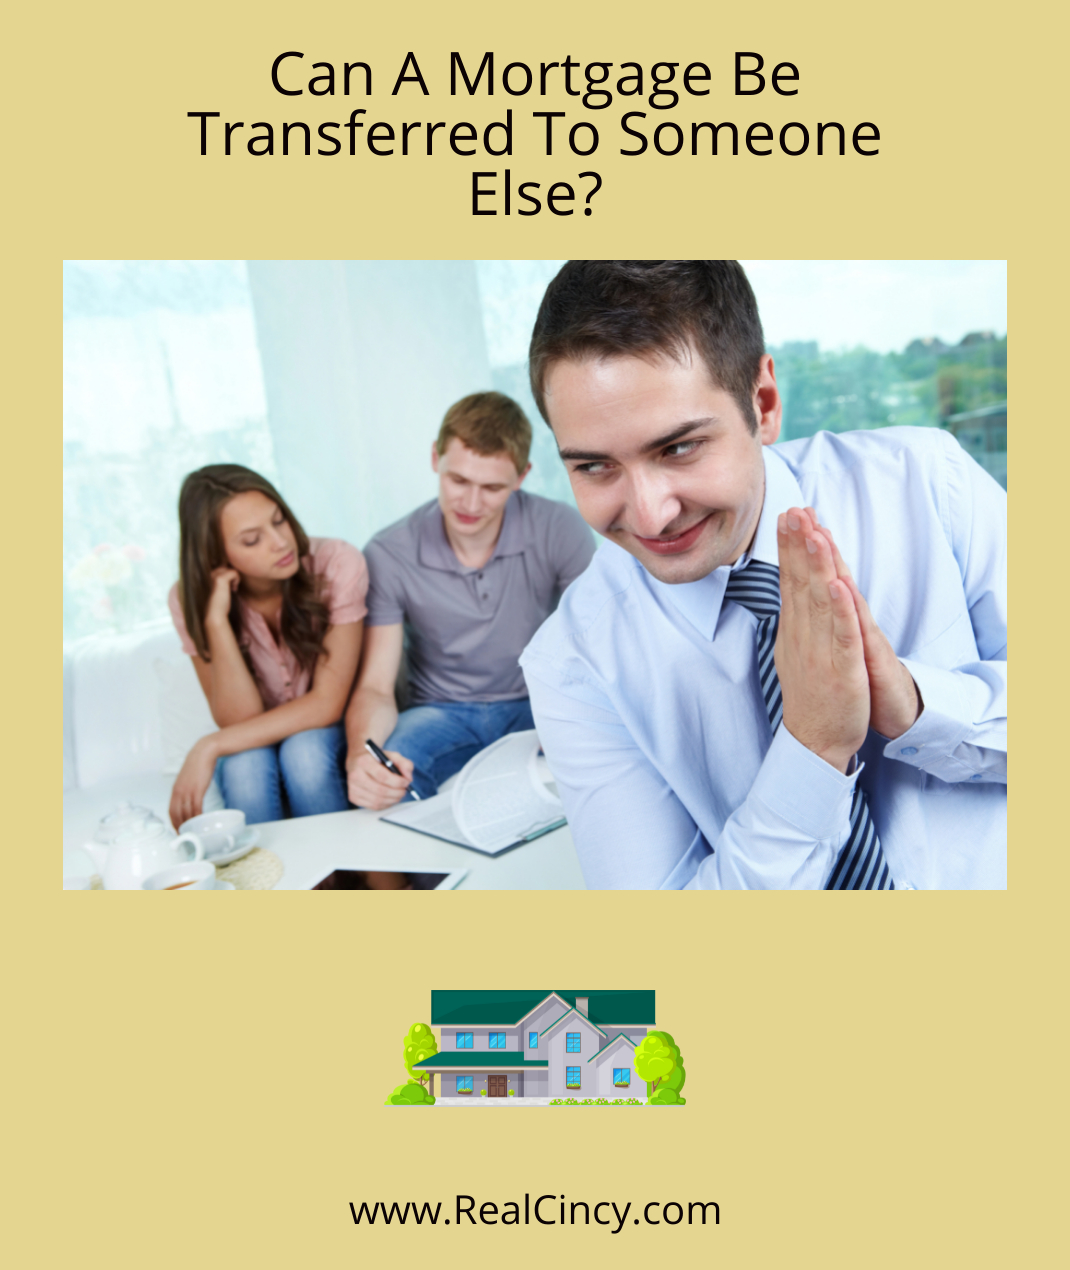 Can A Mortgage Be Transferred To Someone Else